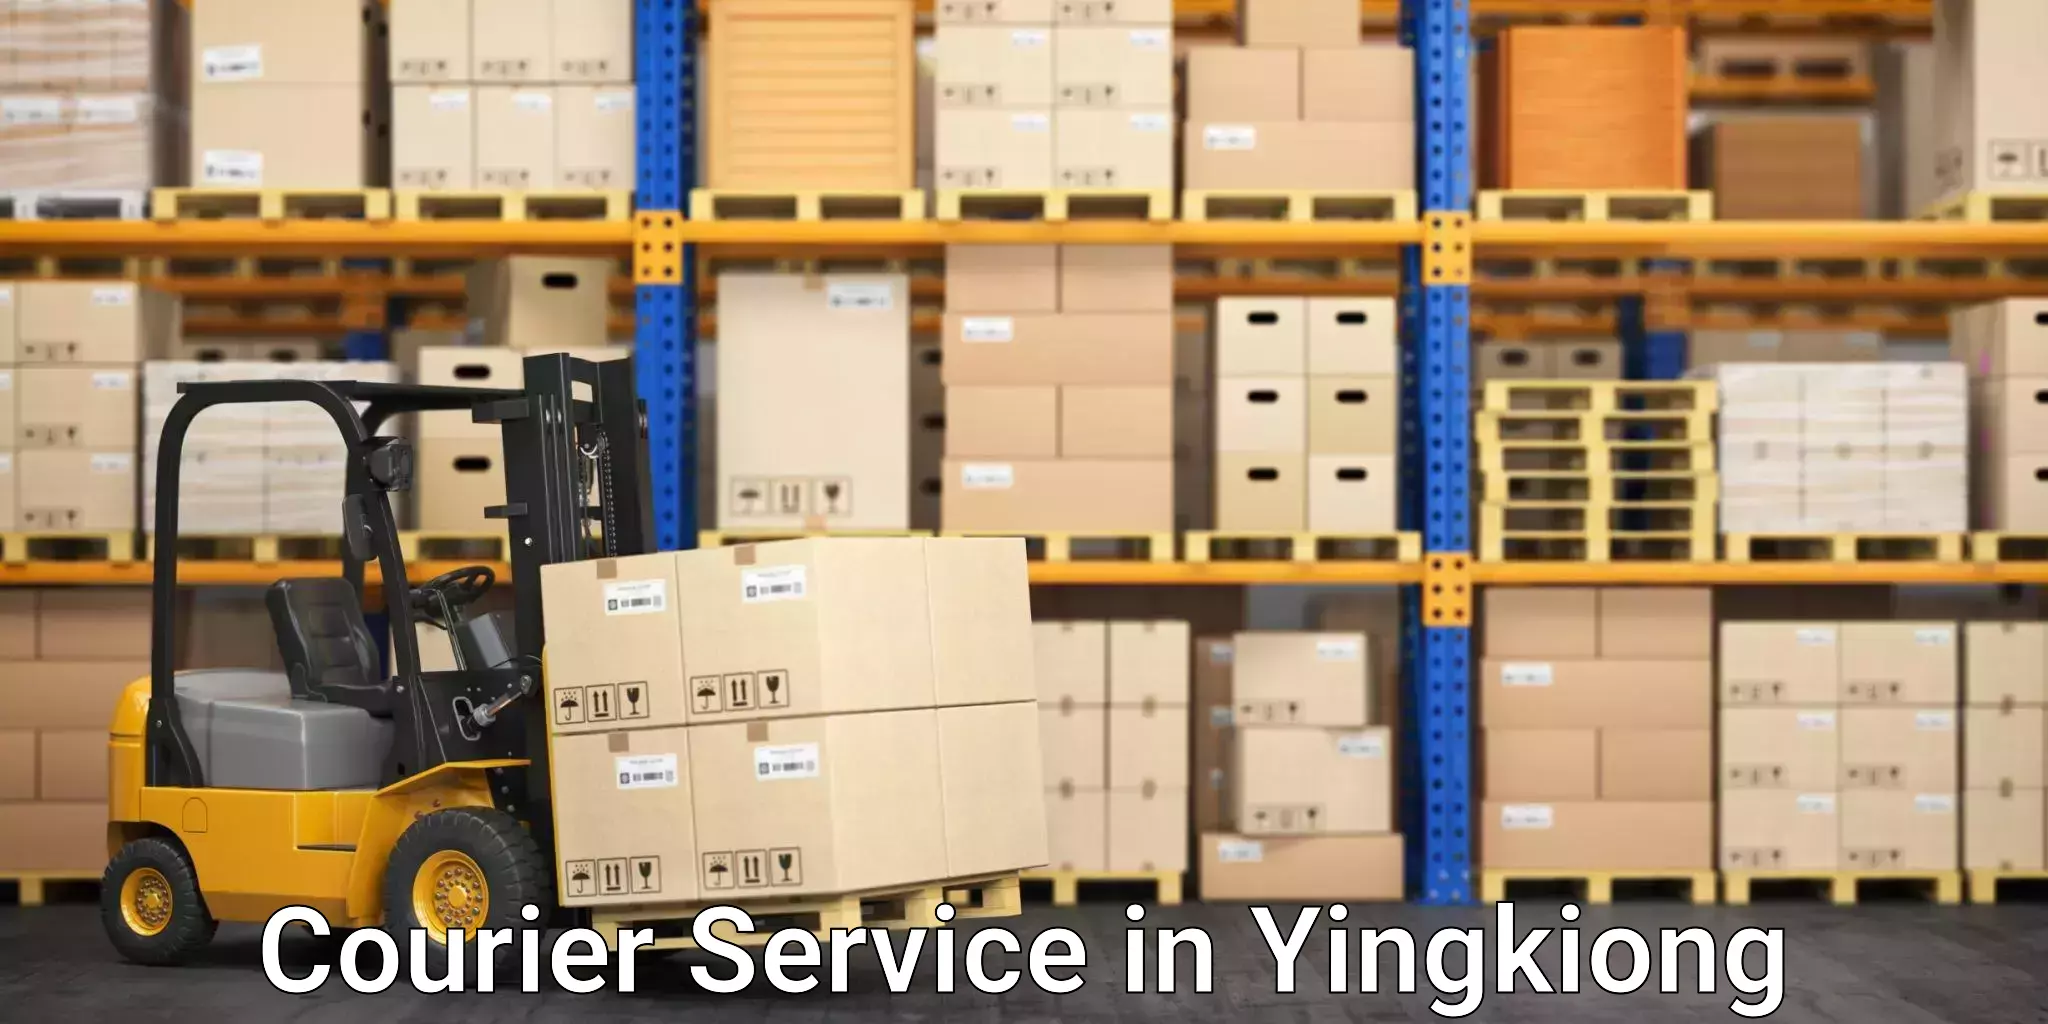 High-efficiency logistics in Yingkiong